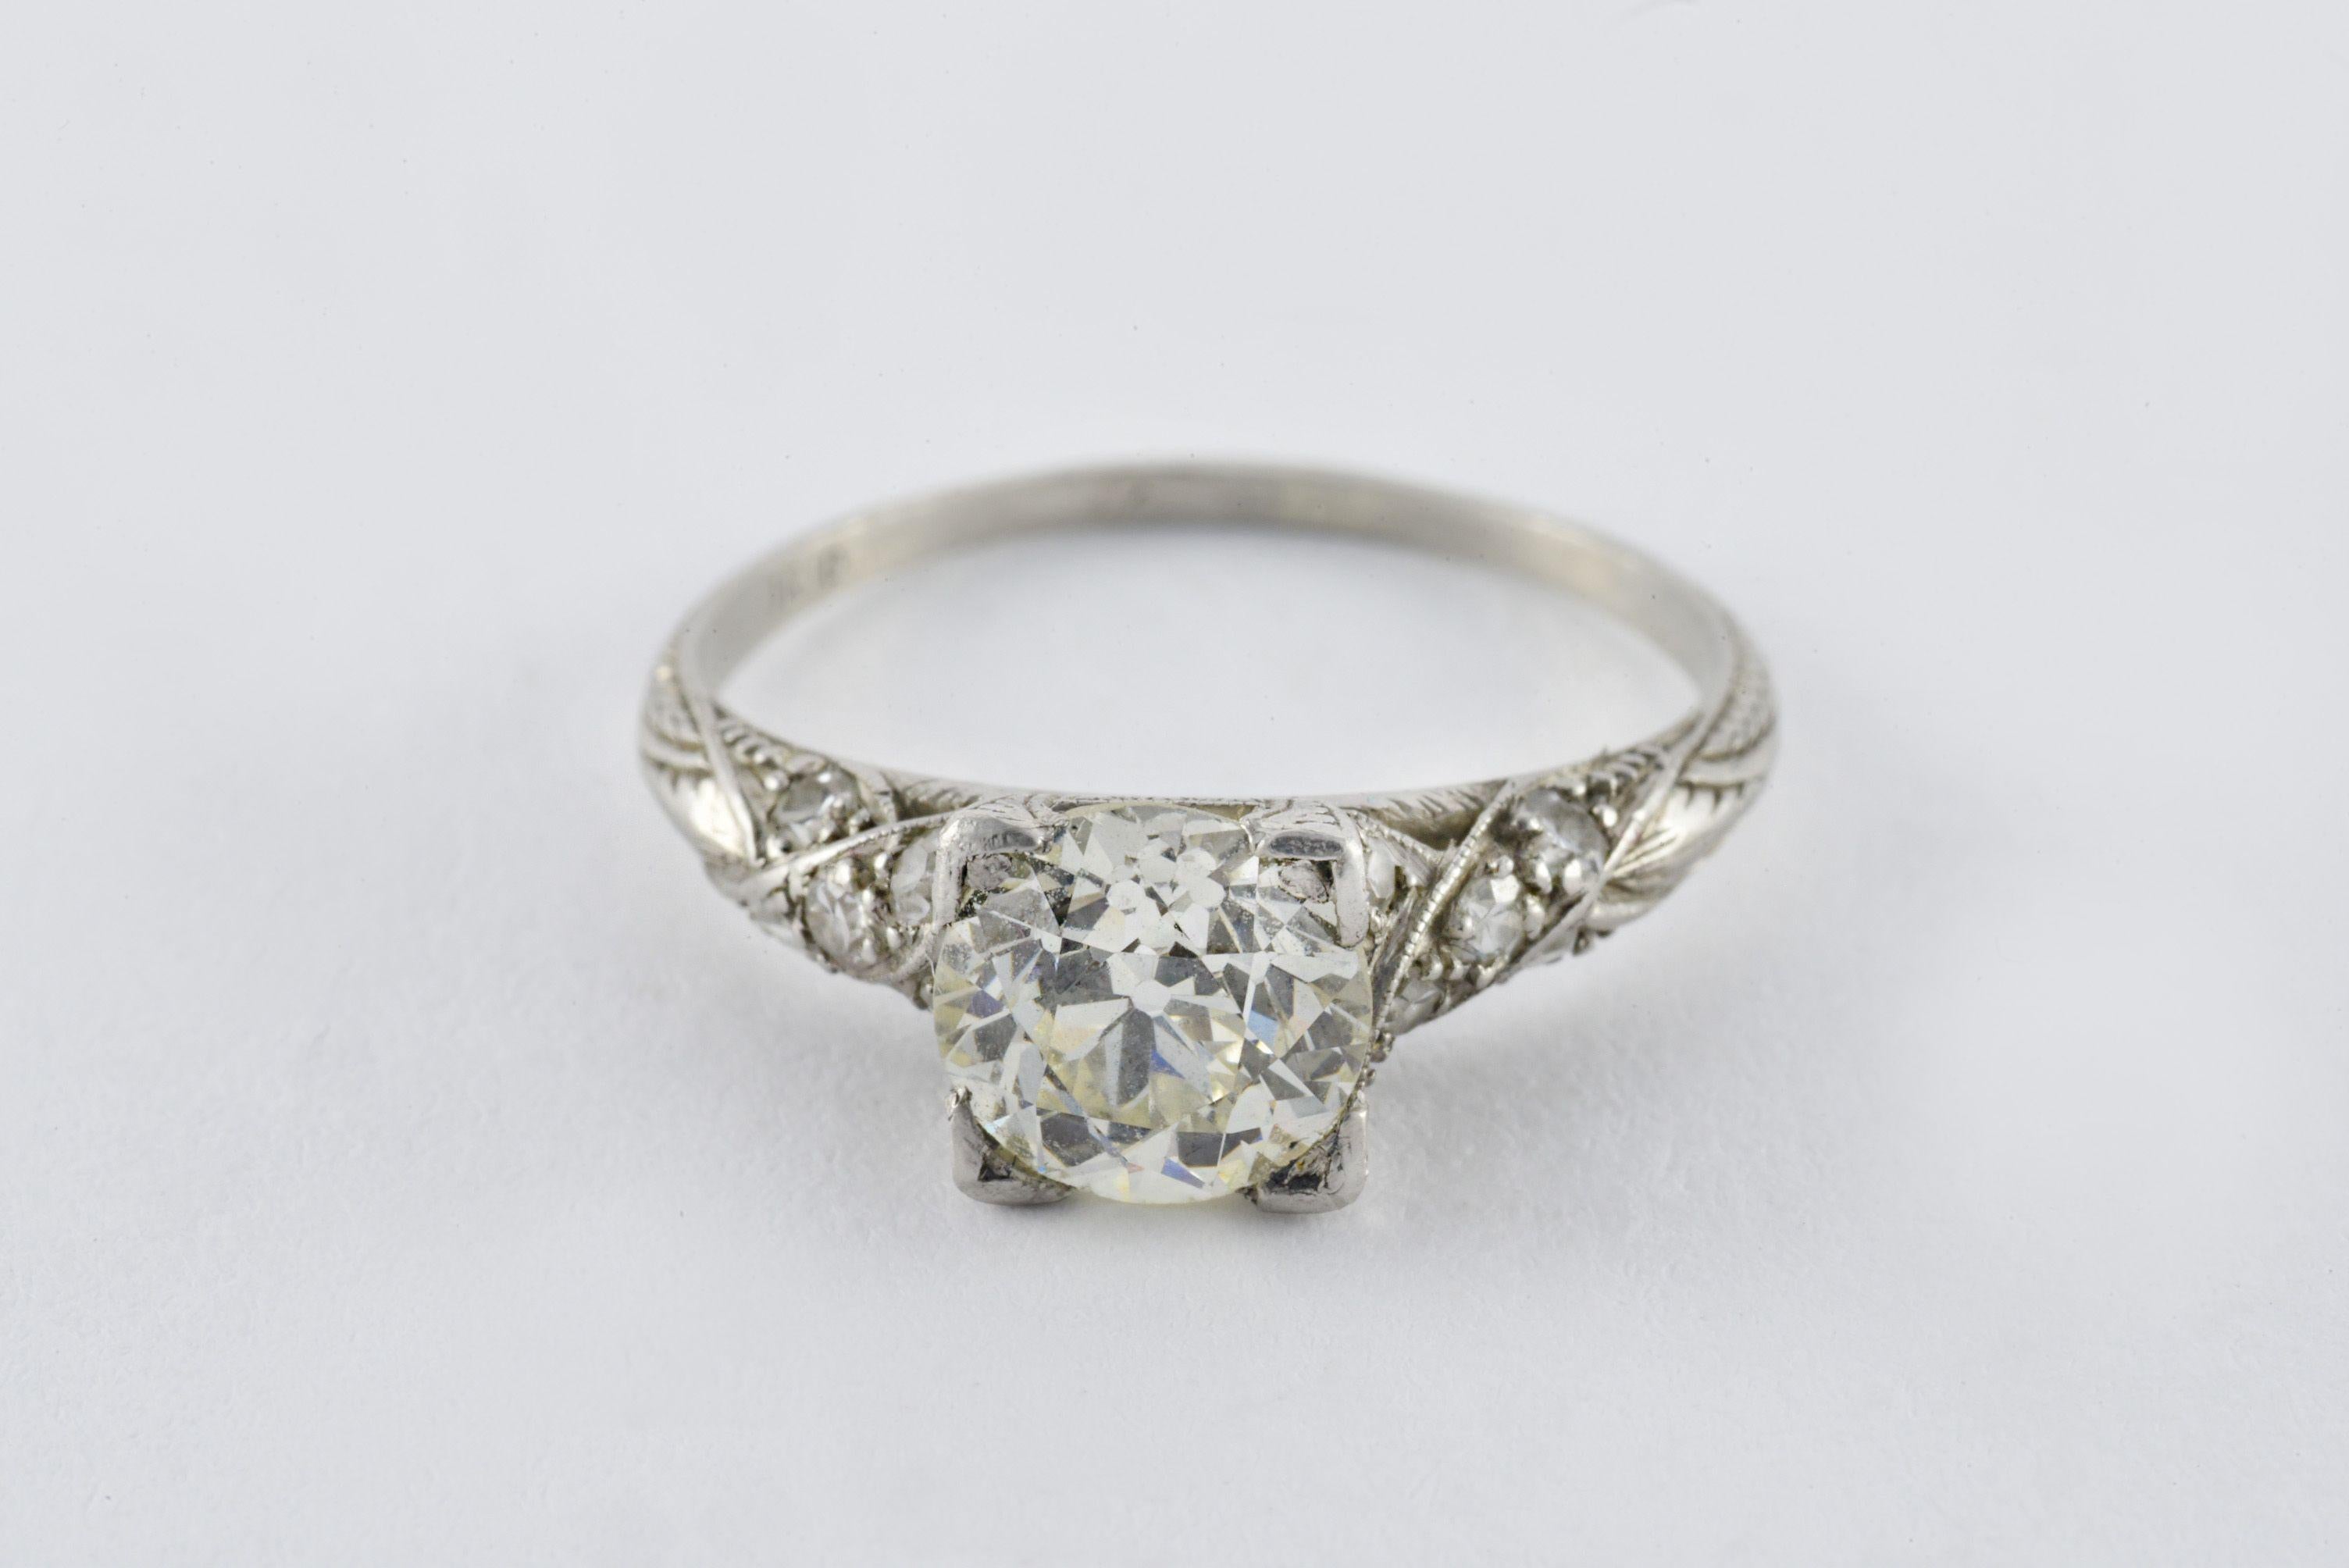 Crafted in the 1920s from platinum, this Art Deco ring is set with an Old European cut diamond measuring approximately 1.35 carats, L color, VS clarity and accented with ten single cut diamonds totaling 0.10 carats.  
